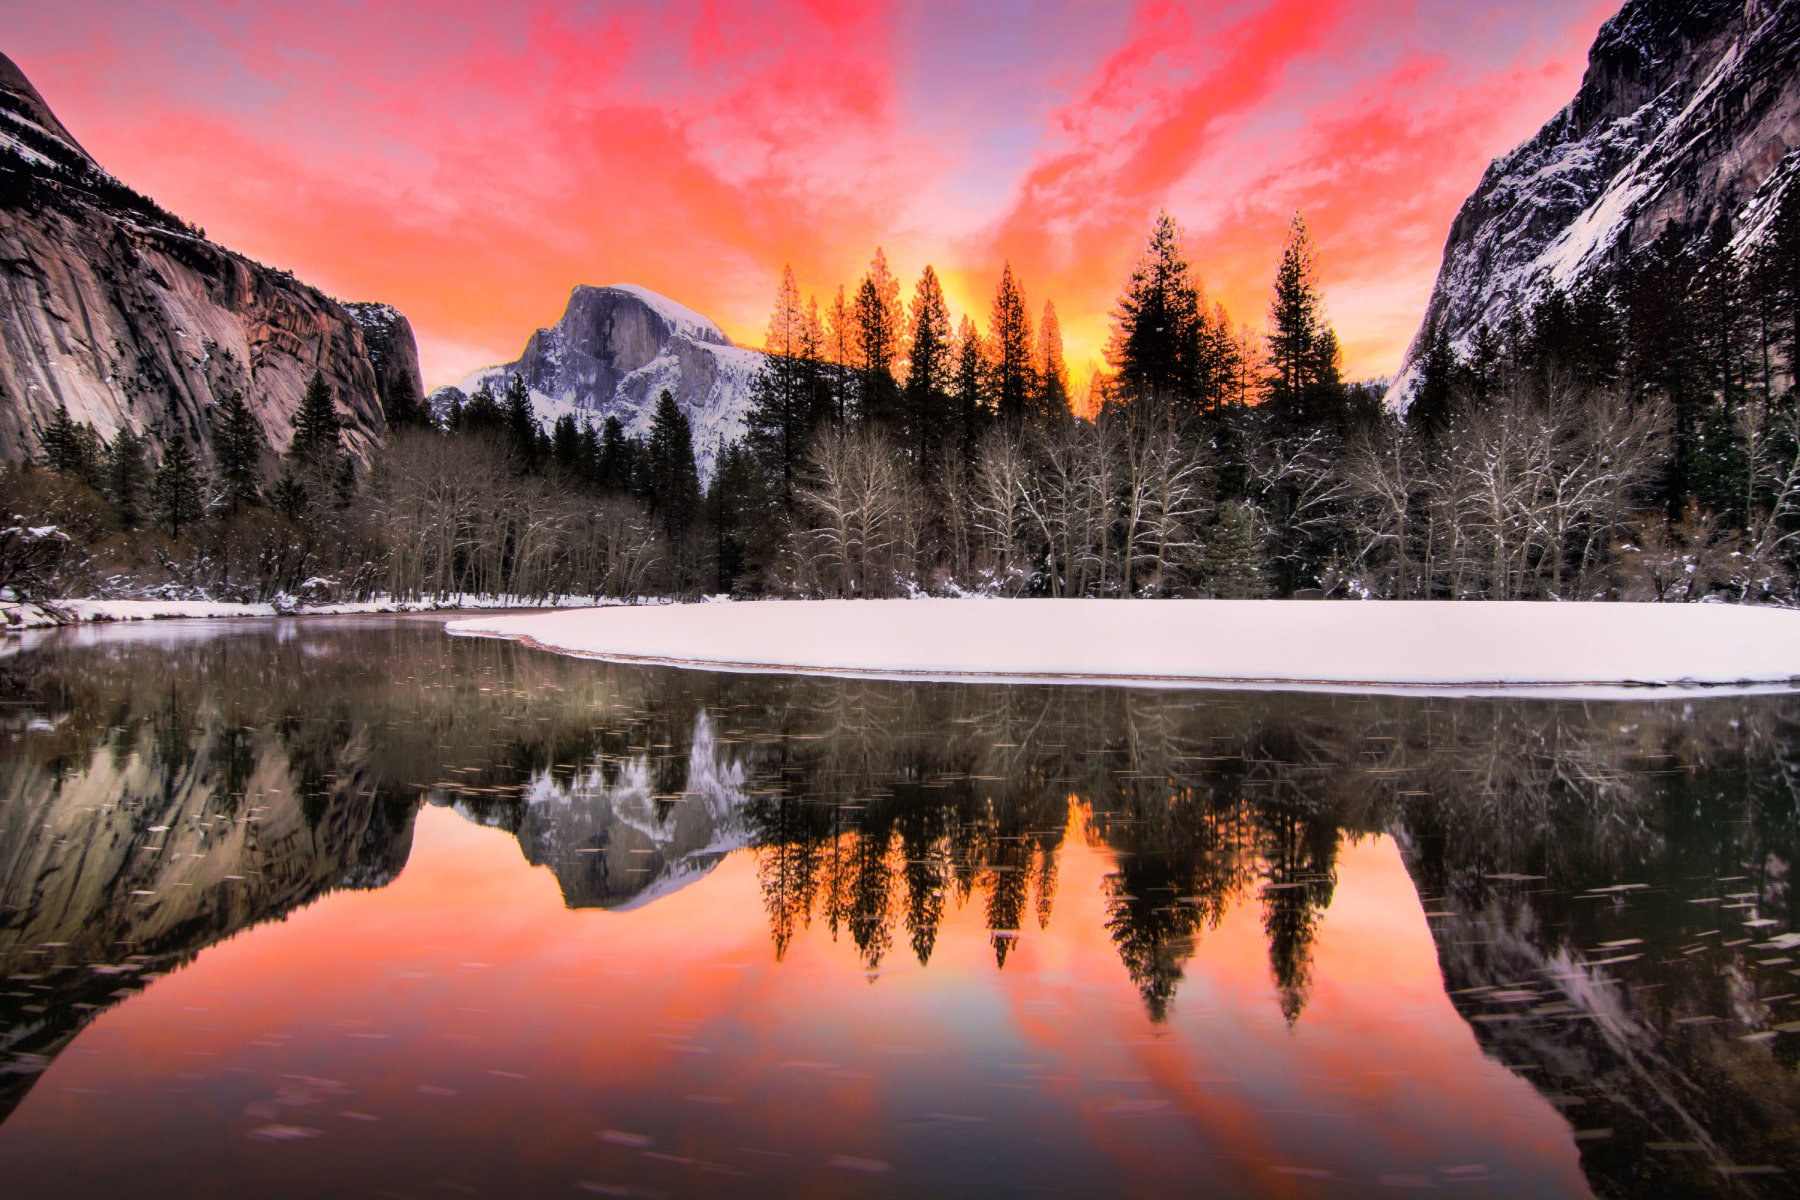 Yosemite's beauty makes it one of the best national parks in February.